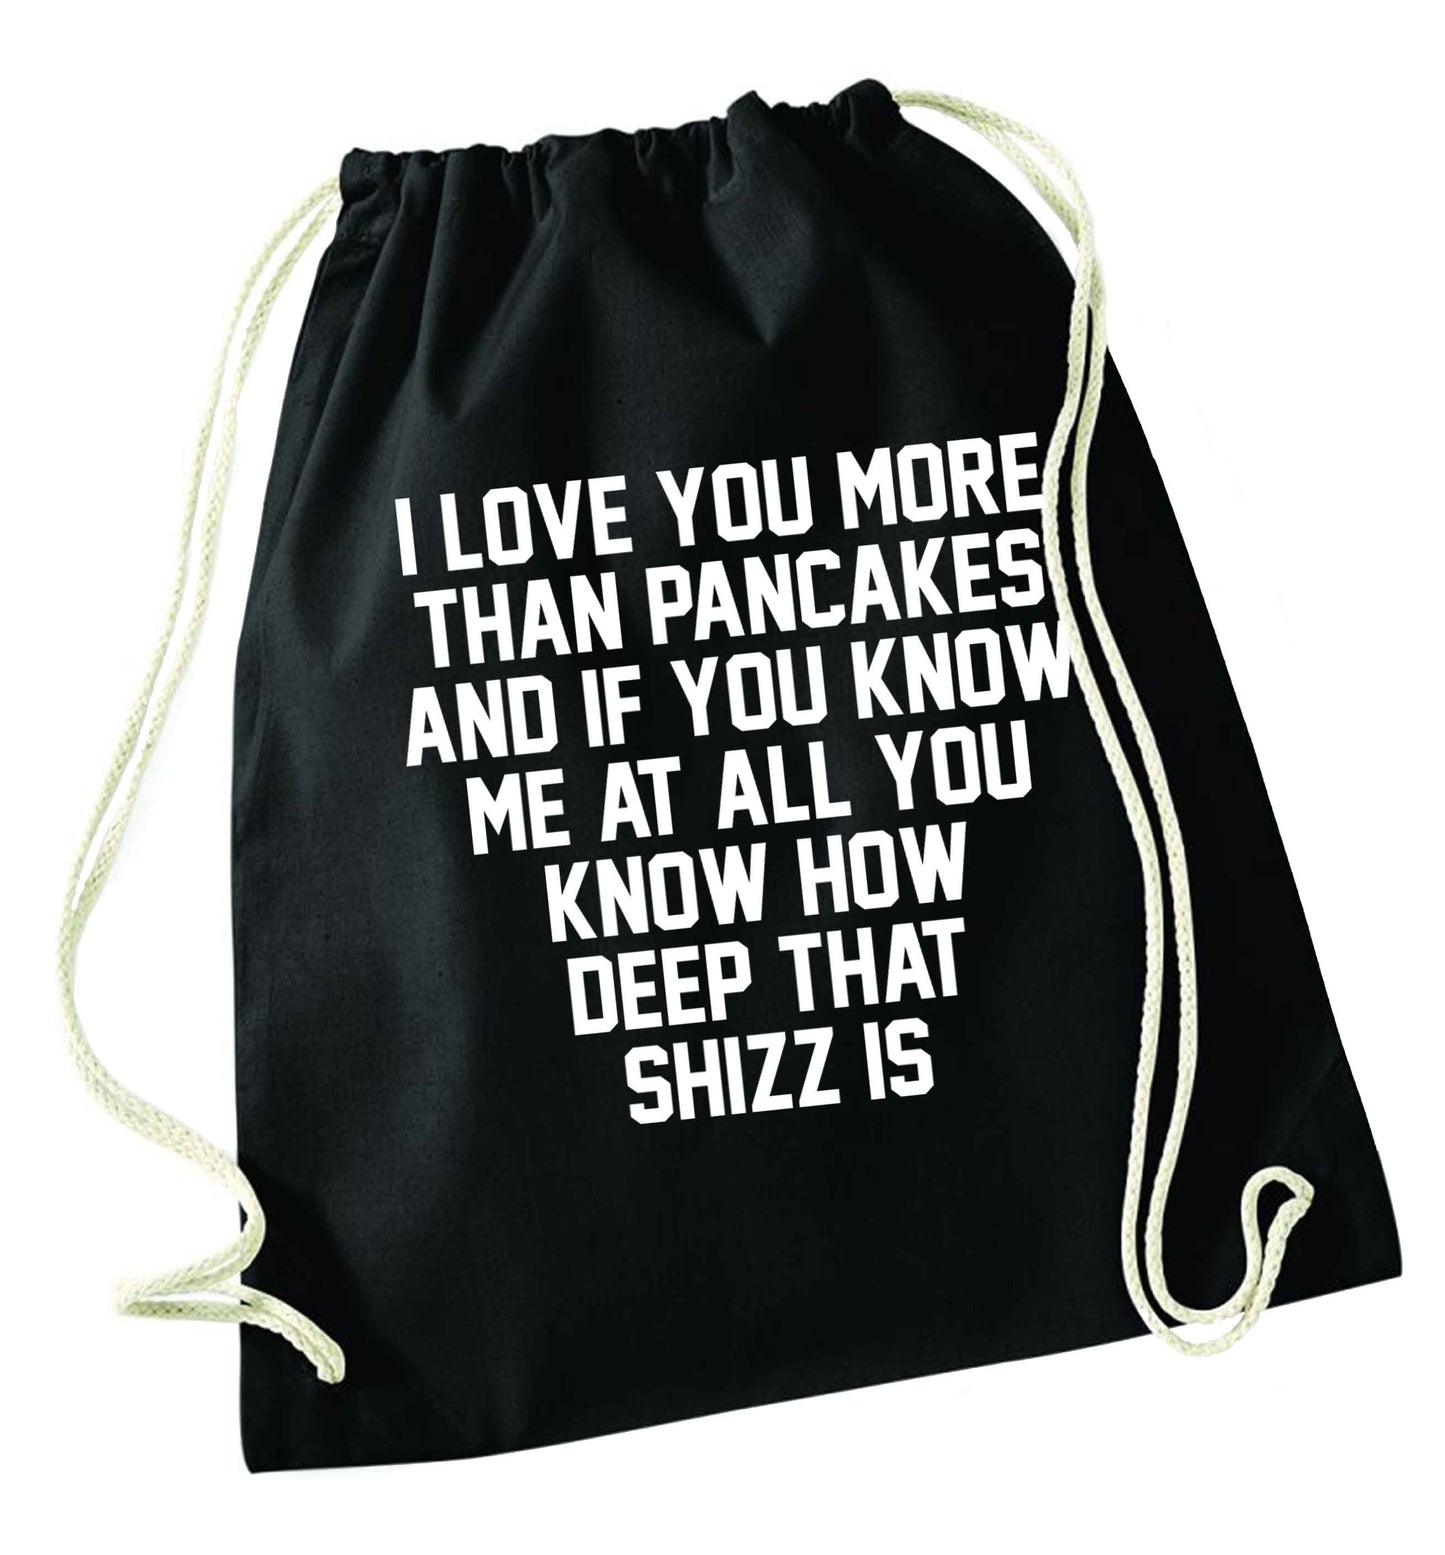 I love you more than pancakes and if you know me at all you know how deep that shizz is black drawstring bag